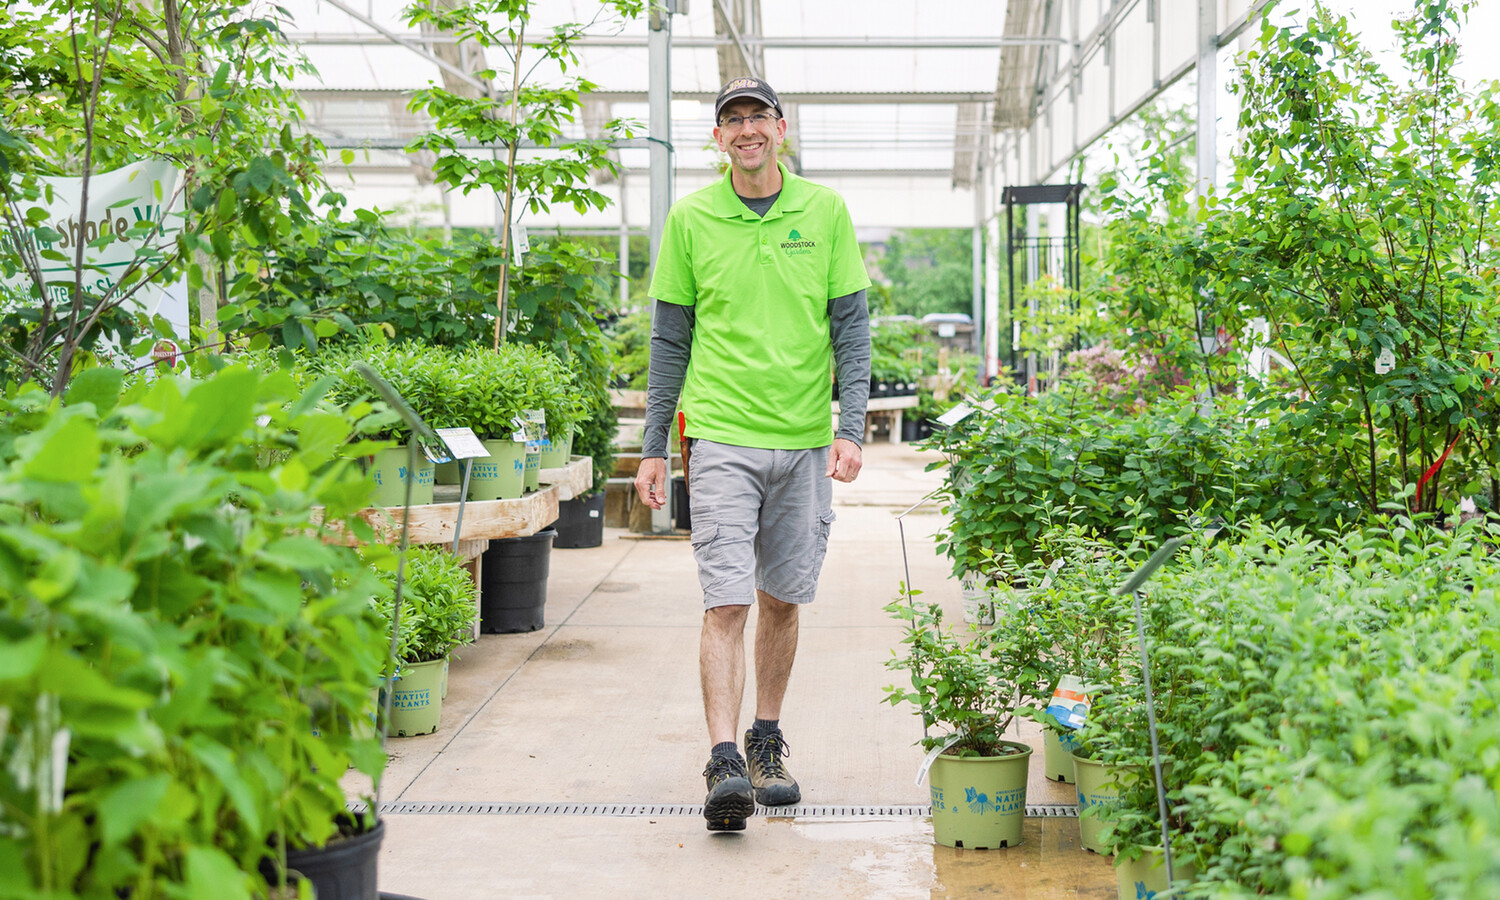 John Fogle (’04), manager at Woodstock Gardens, walks by native plants for sale as part of the statewide native plant program Throwing Shade, which incentivizes native plant sales with grant-funded discounts. The pilot program ended in June but may continue around Virginia this fall after organizers study data from the pilot program.